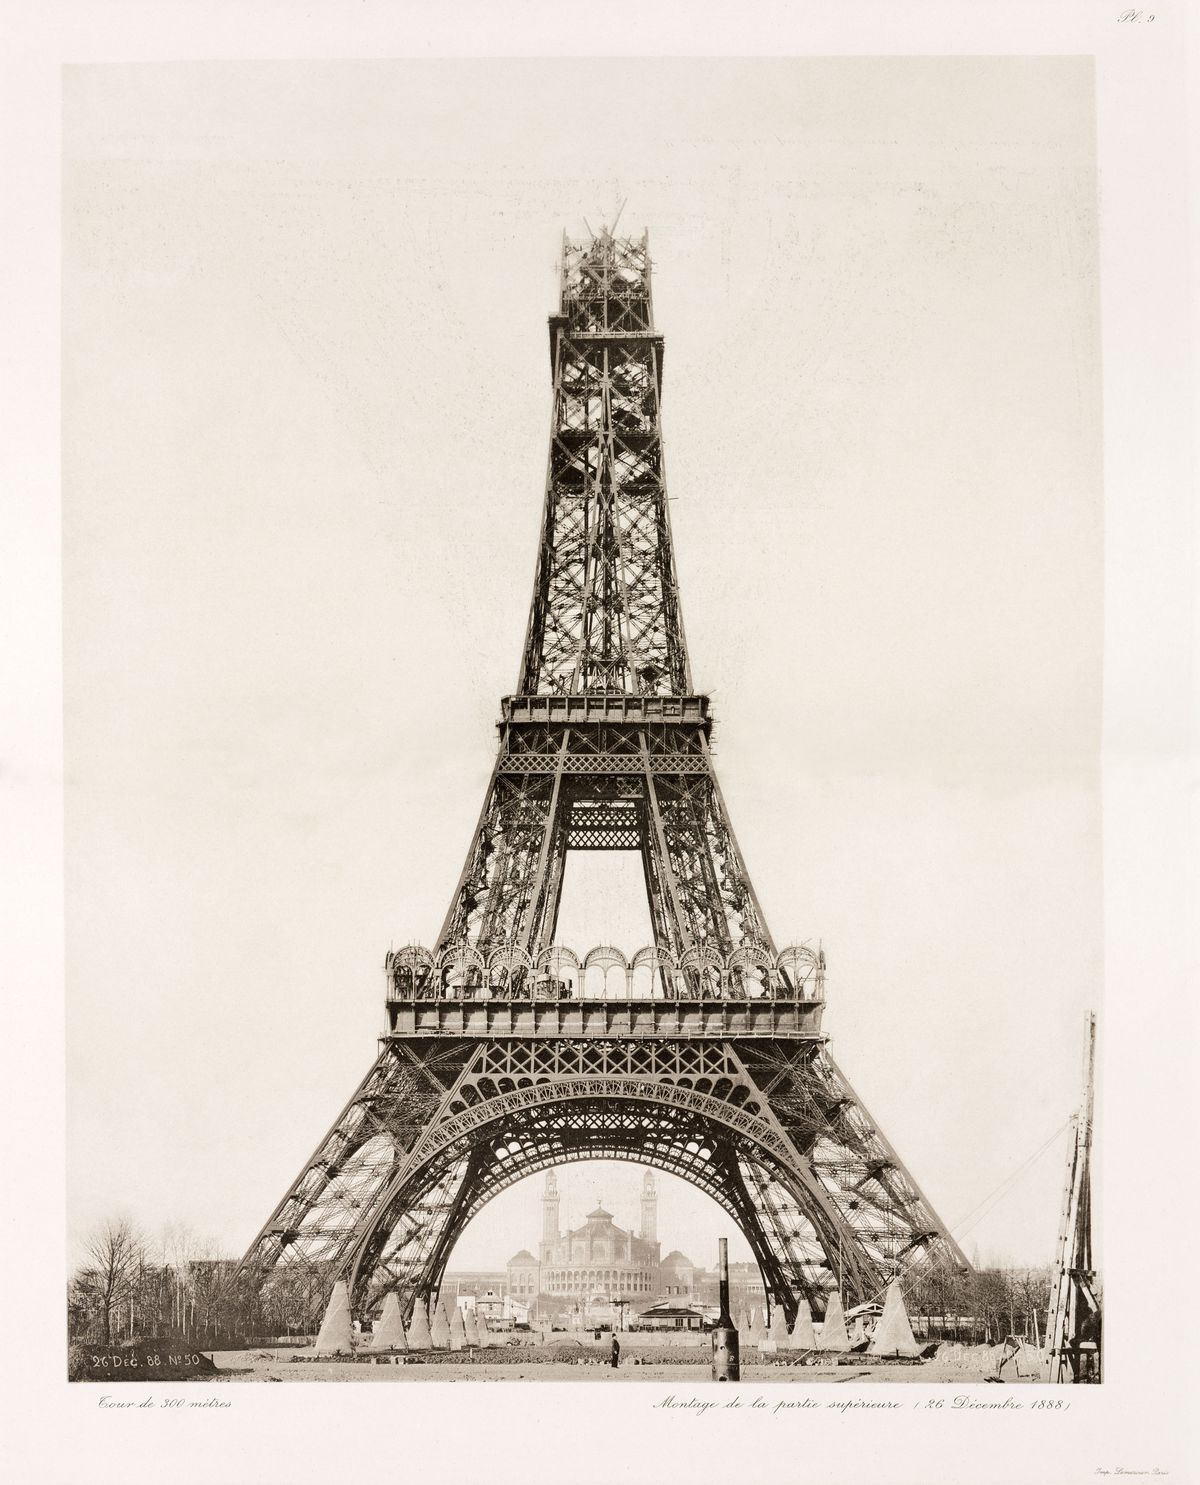 The Eiffel Tower in late December, 1888, nearing completion.